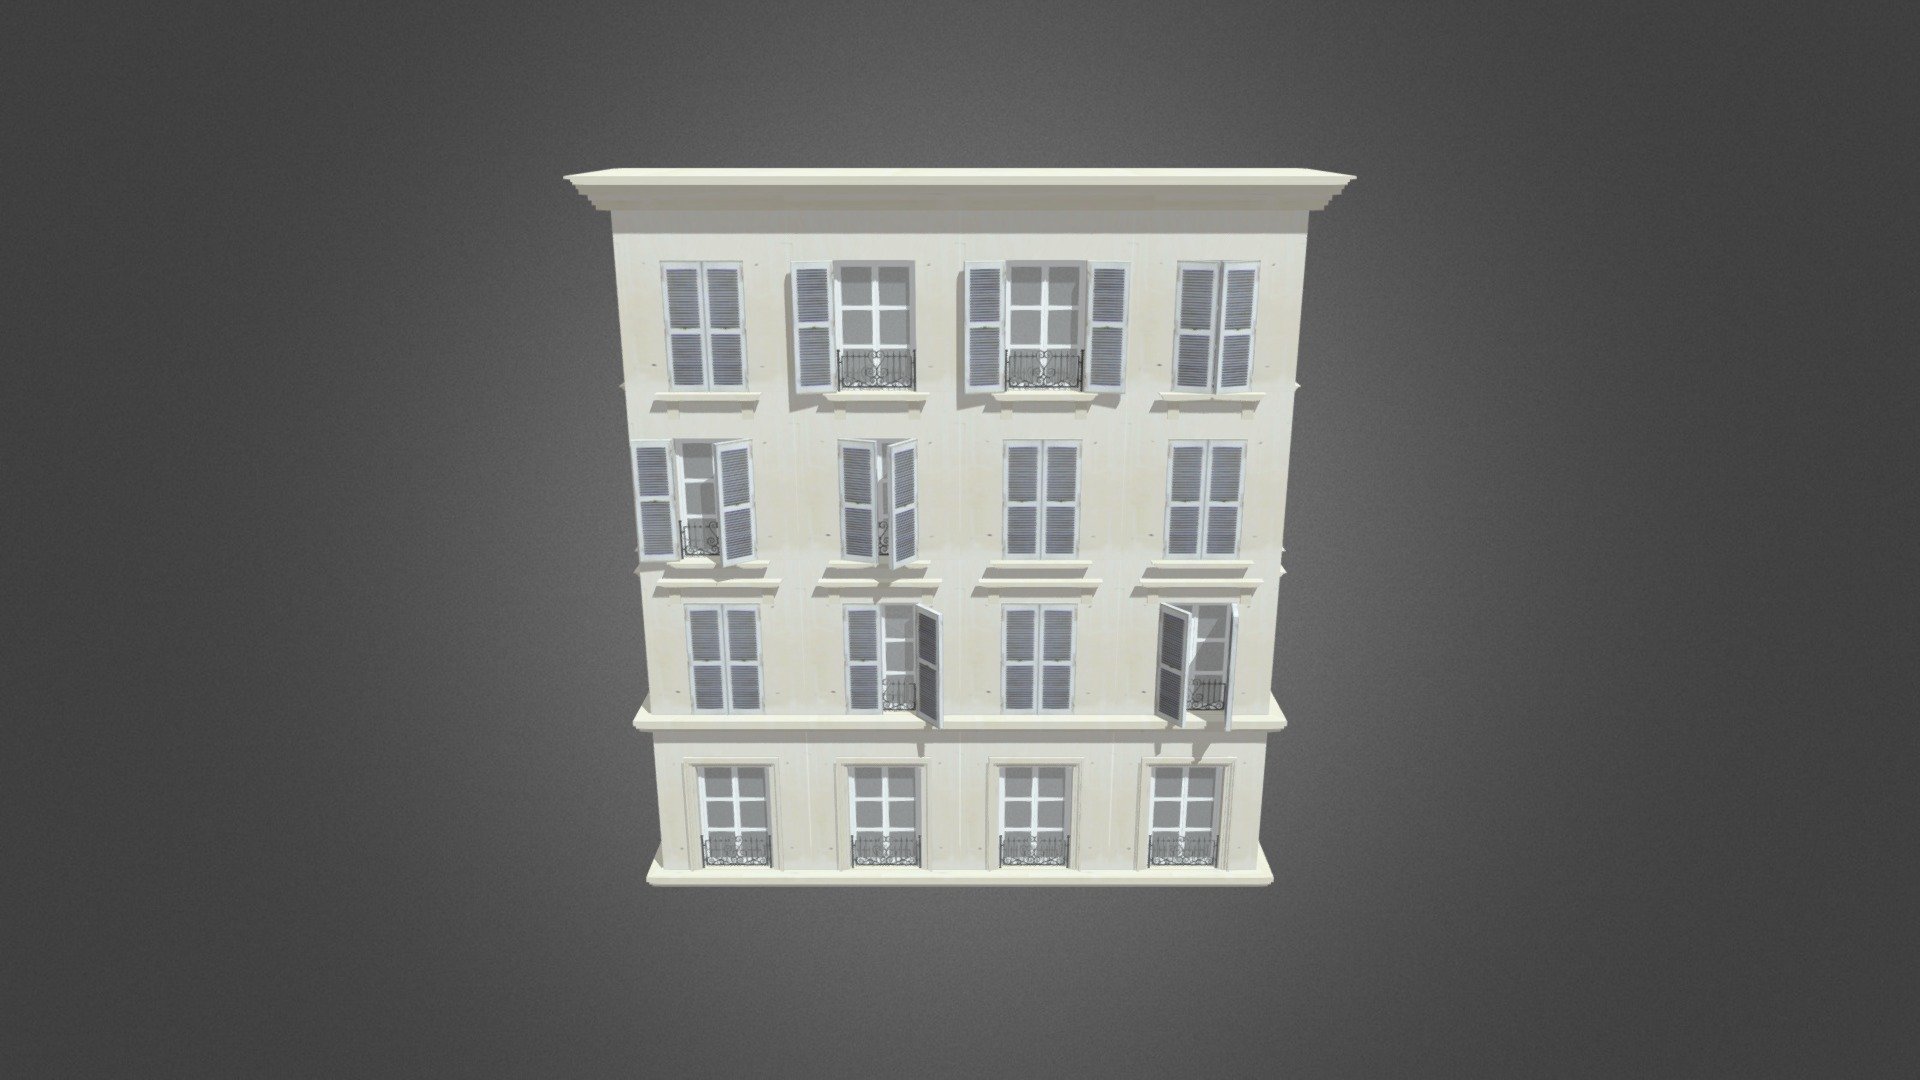 Facade inspired by an old building in Rue des Fossés Saint-Jacques, Paris
Made in blender, textures edited in Photoshop - Parisian facade - 3D model by lexmcnevan 3d model